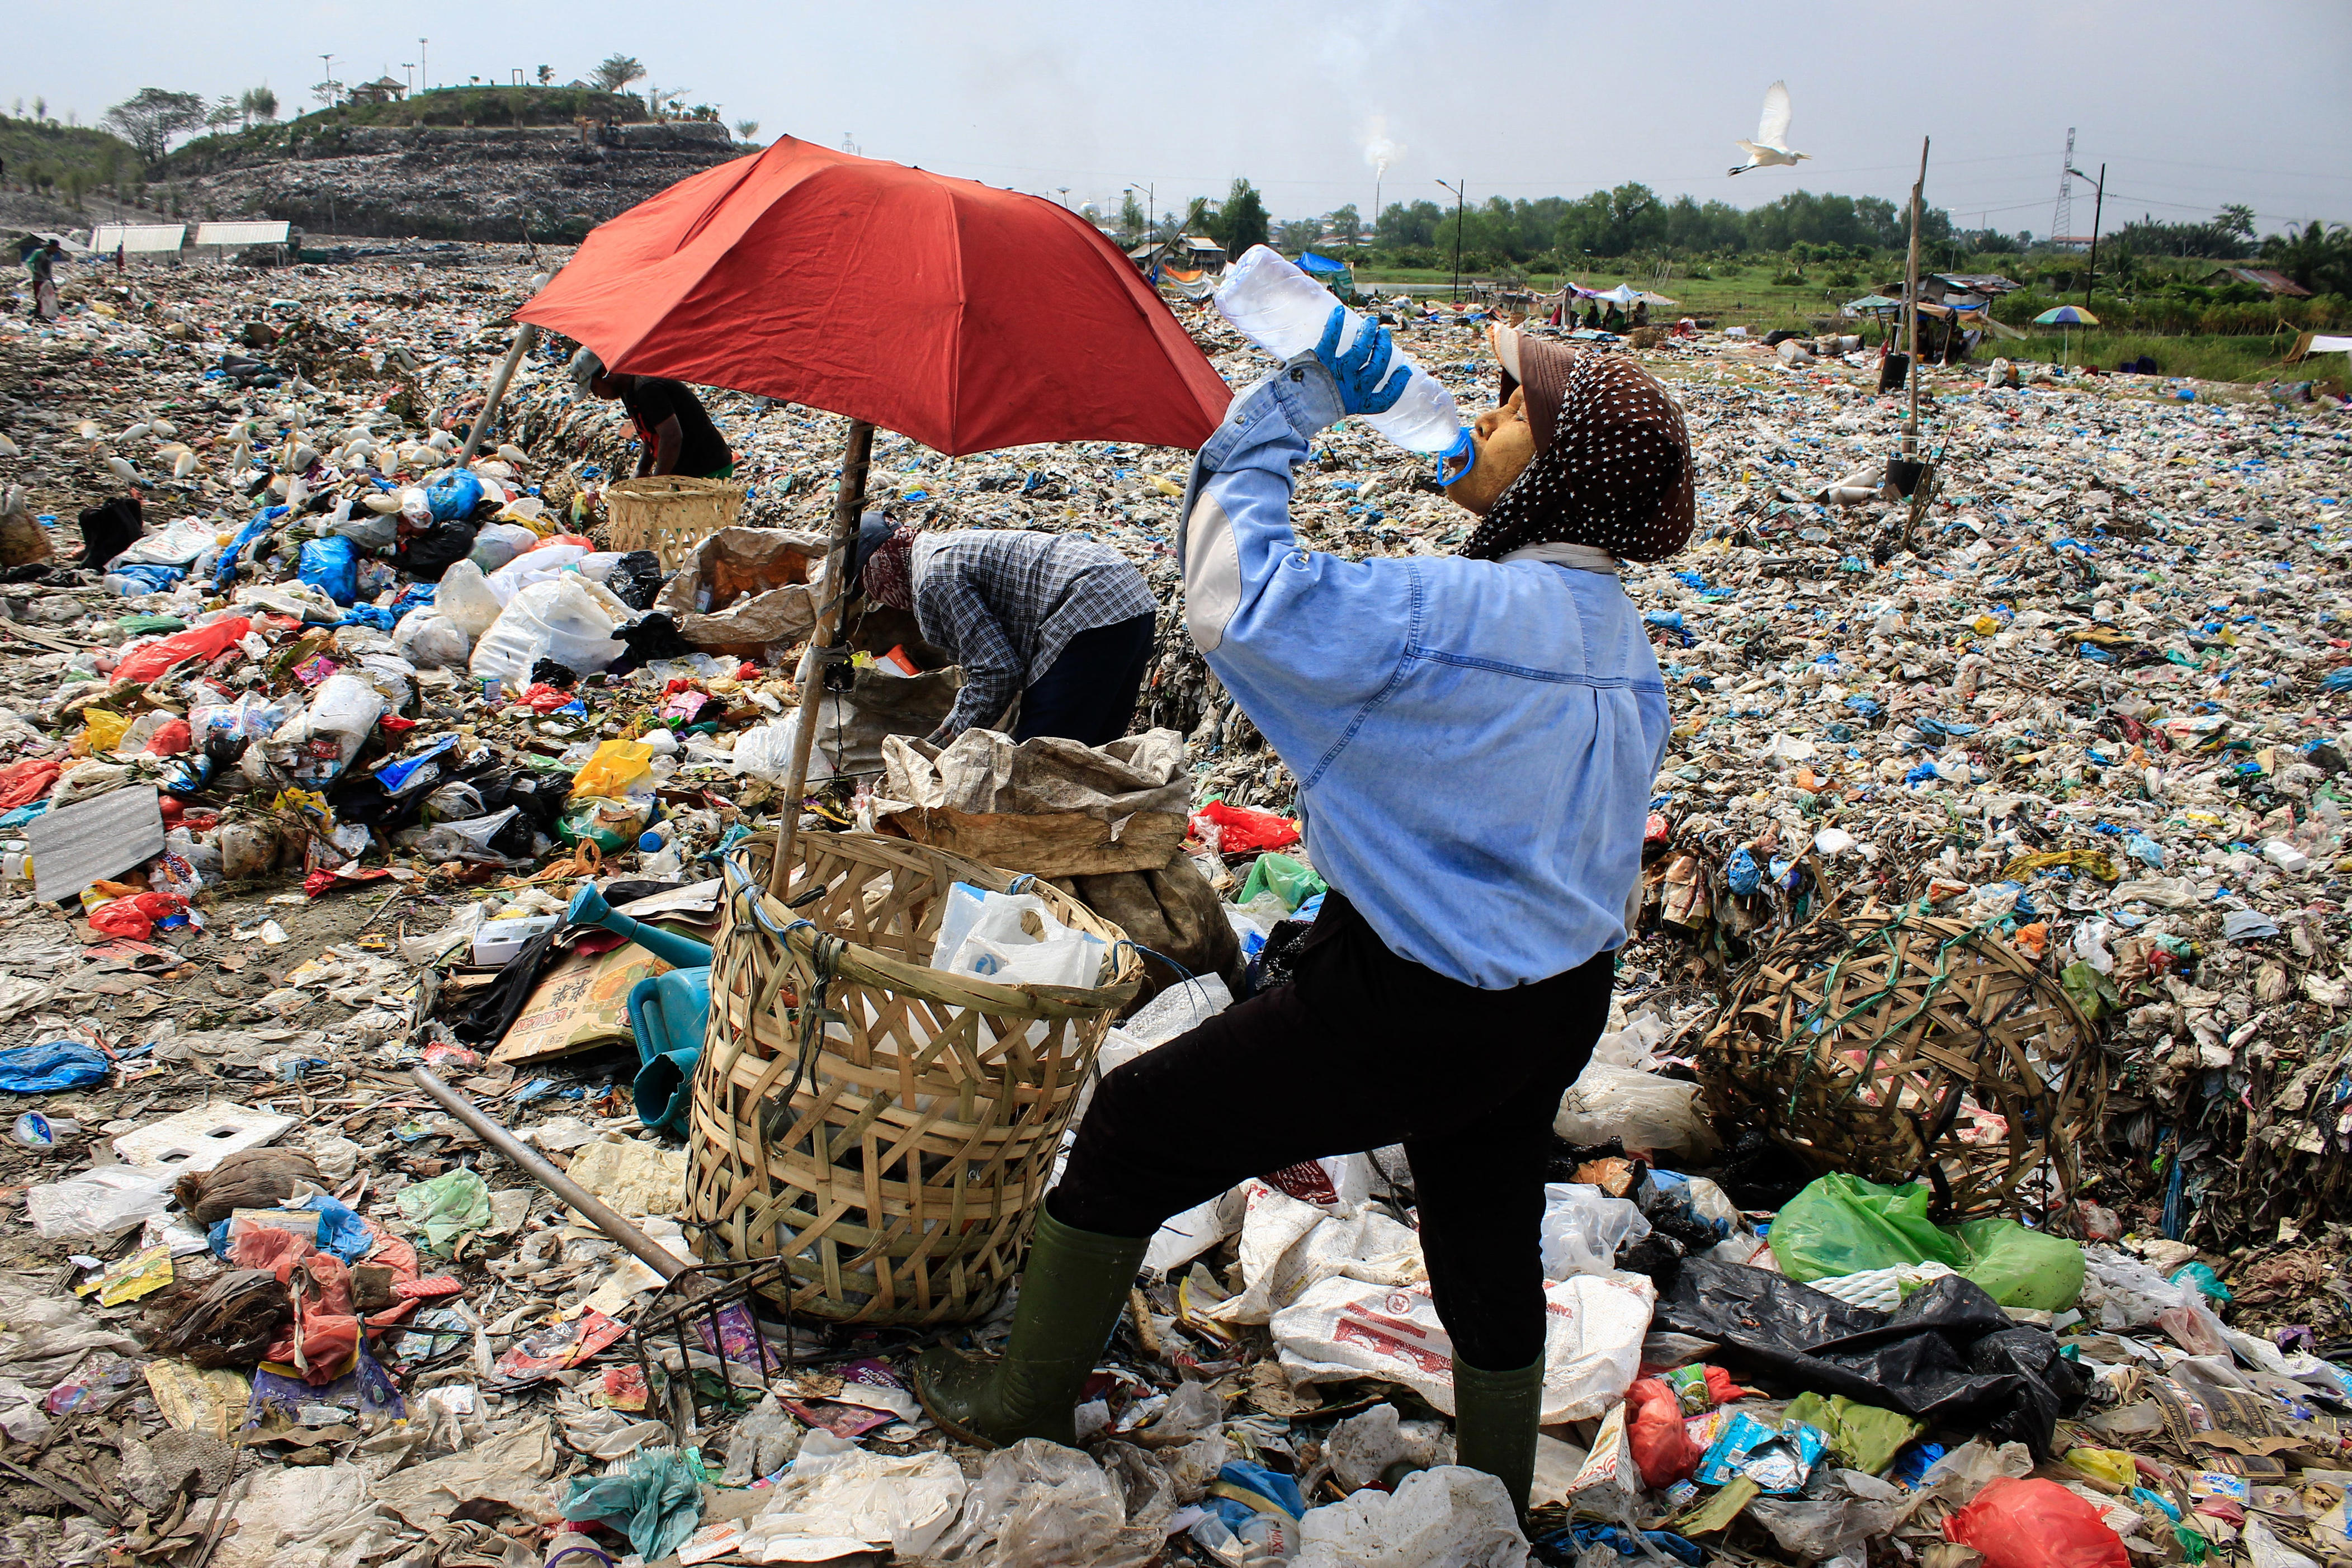 microsoft, china stopped taking our plastic. now america is drowning in it.